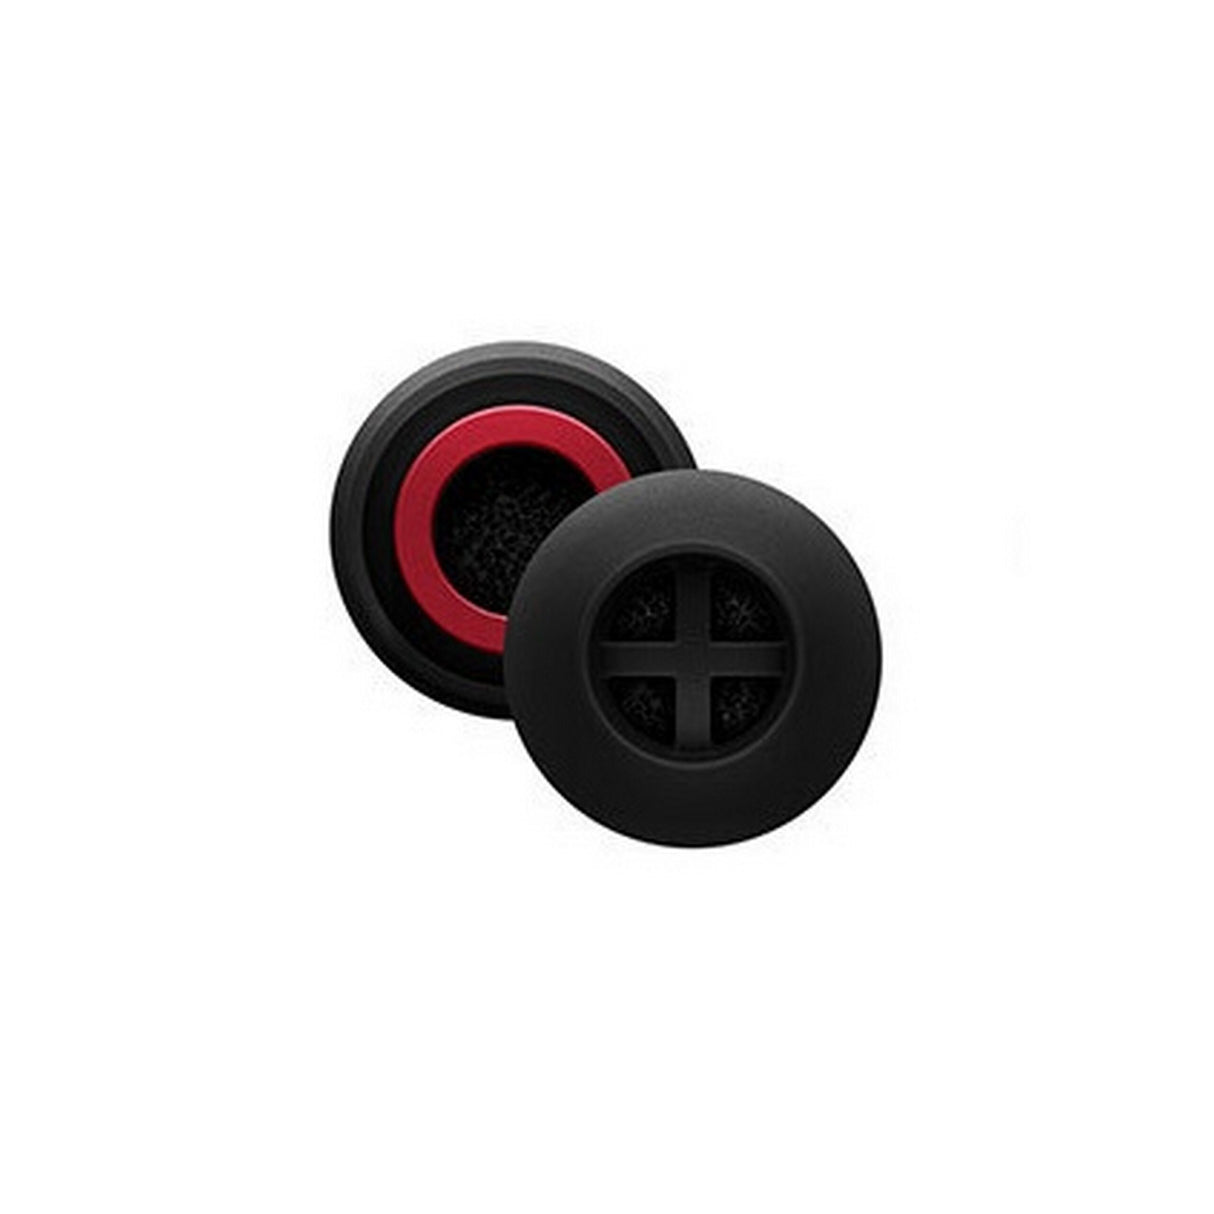 Sennheiser Silicone Ear Adapter for IE 40/IE 400/IE 500, Small, Red